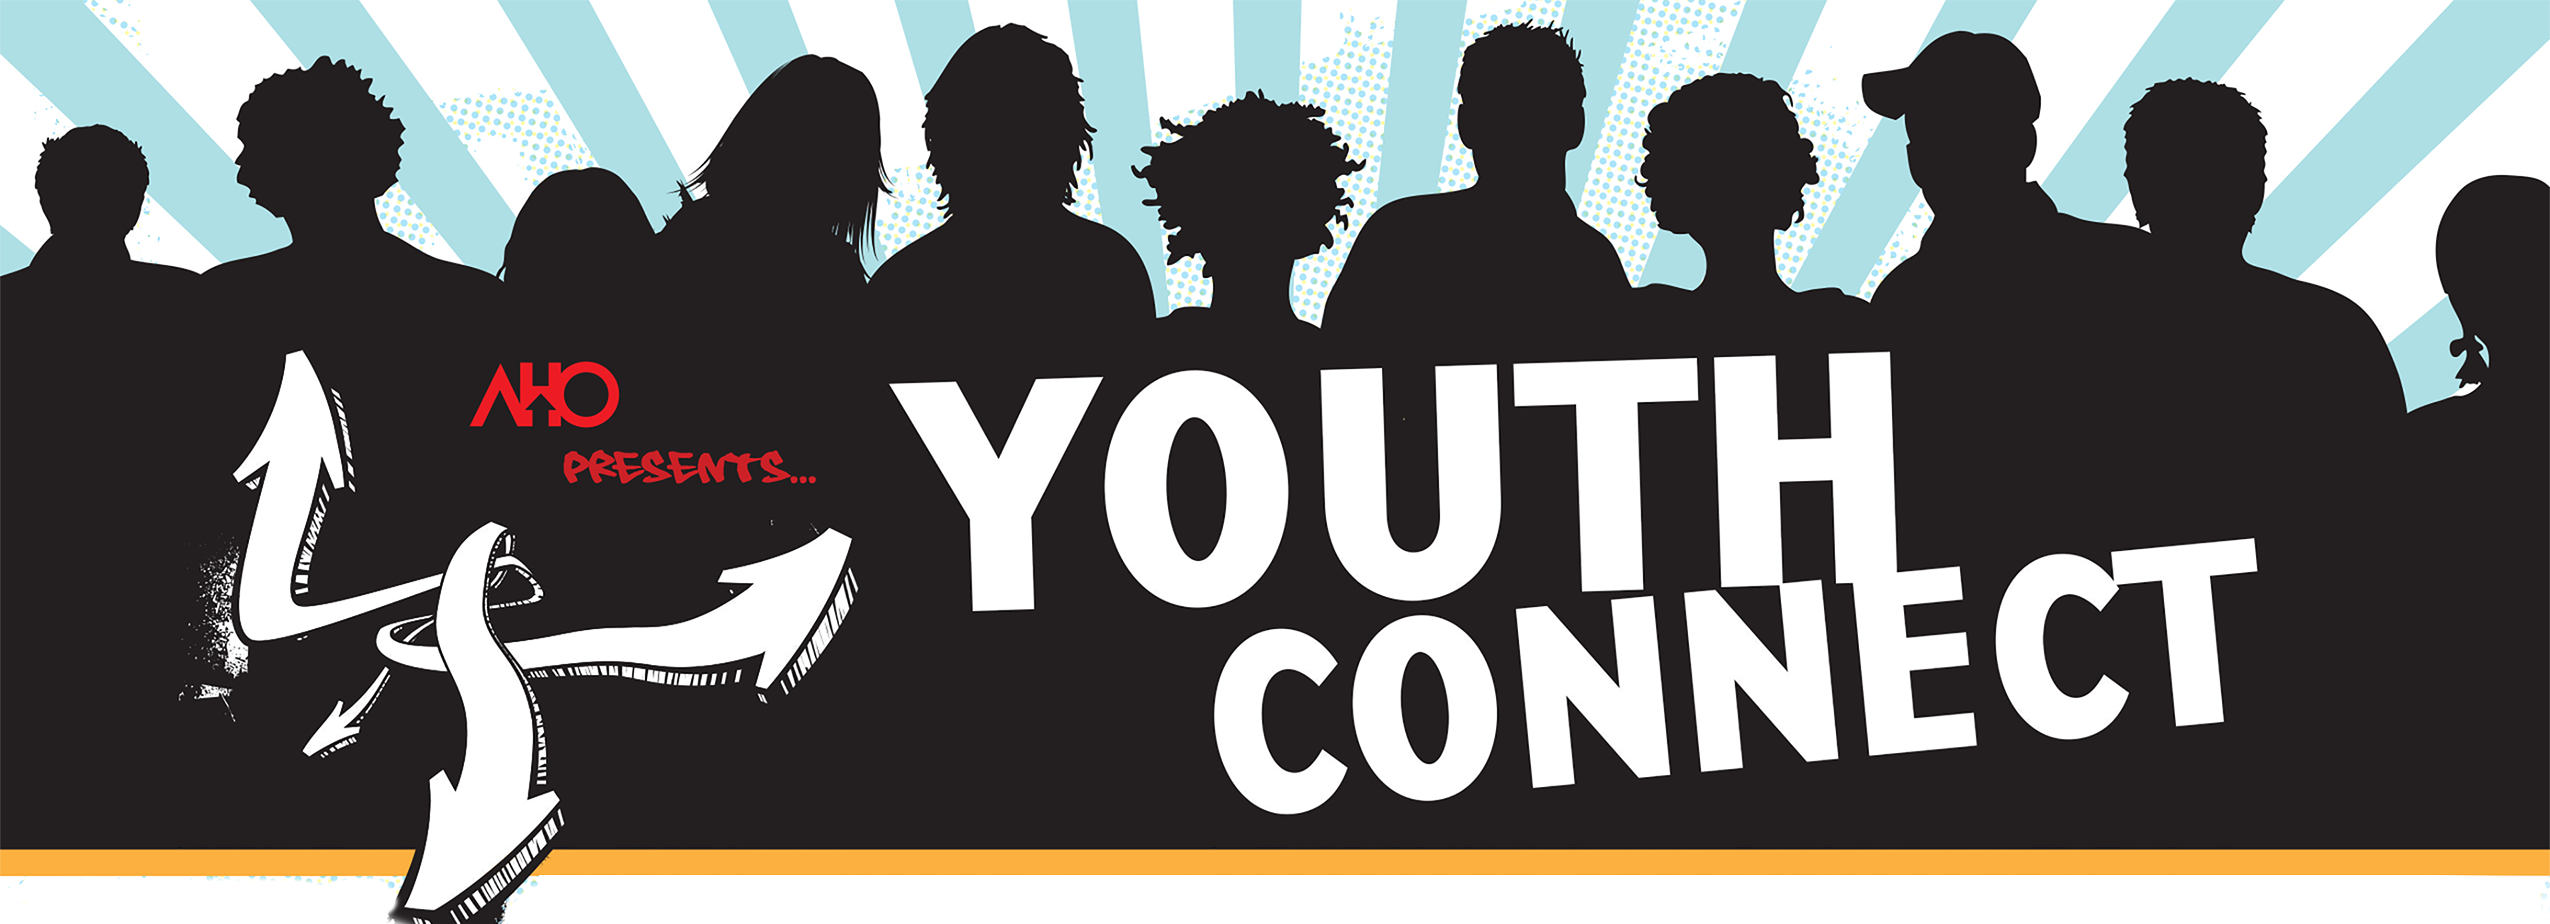 AHO Presents Youth Connect graphic with students silhouetted 